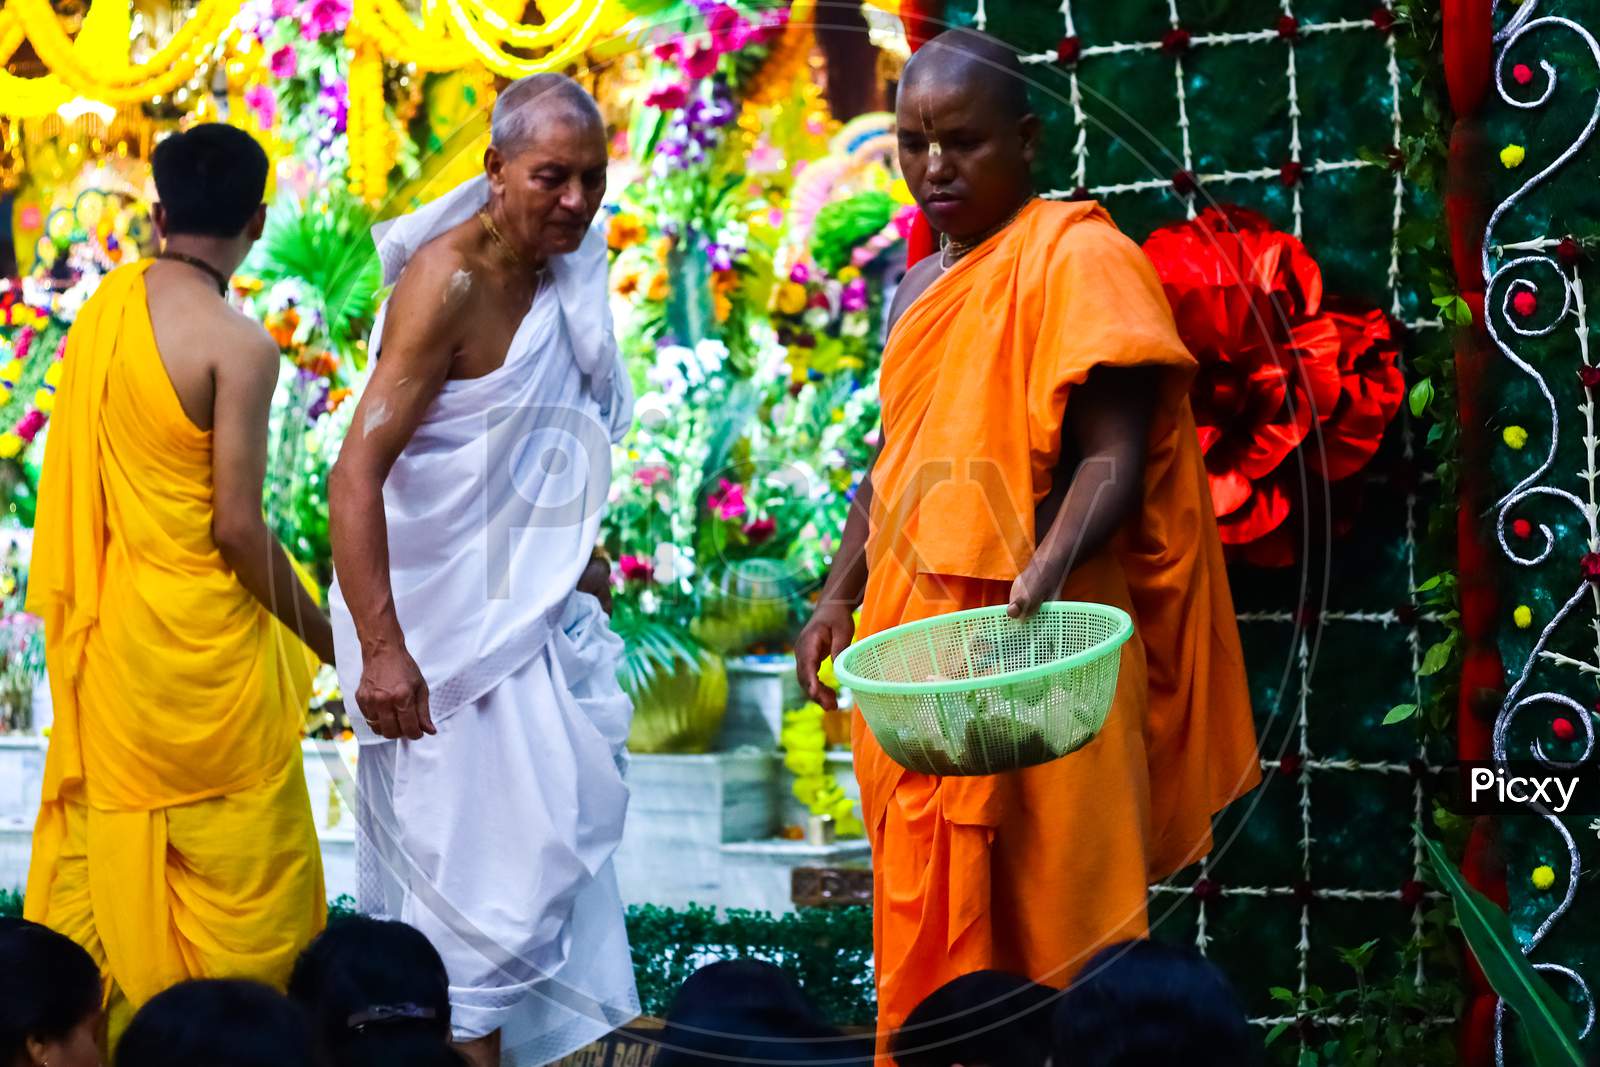 August 15Th, 2020, Iskon Temple, Krishnanagar, Nadia West Bengal. Monks Collect Offerings From Devotees In A Basket After Evening Puja At Krishna Temple, Iskon.